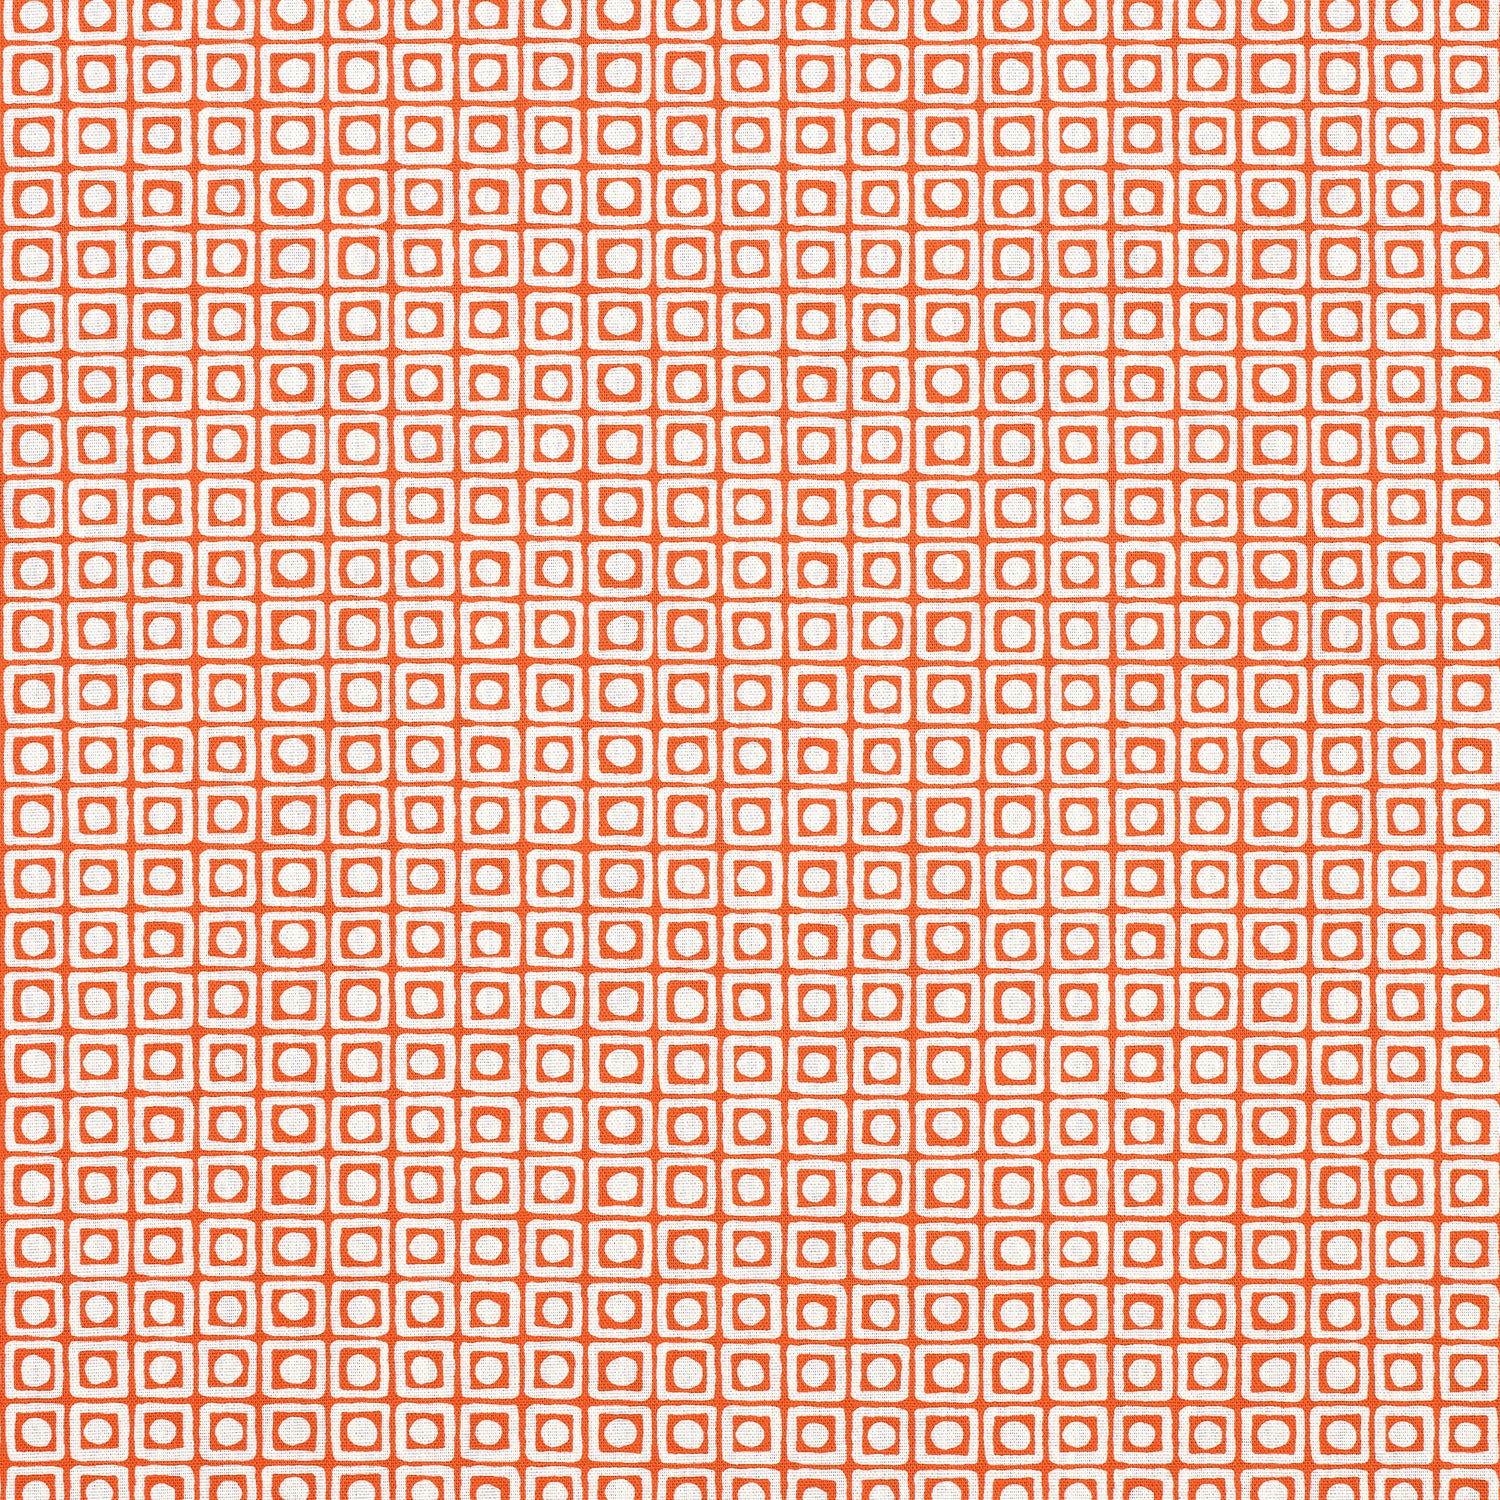 Santa Monica fabric in orange color - pattern number F913101 - by Thibaut in the Summer House collection